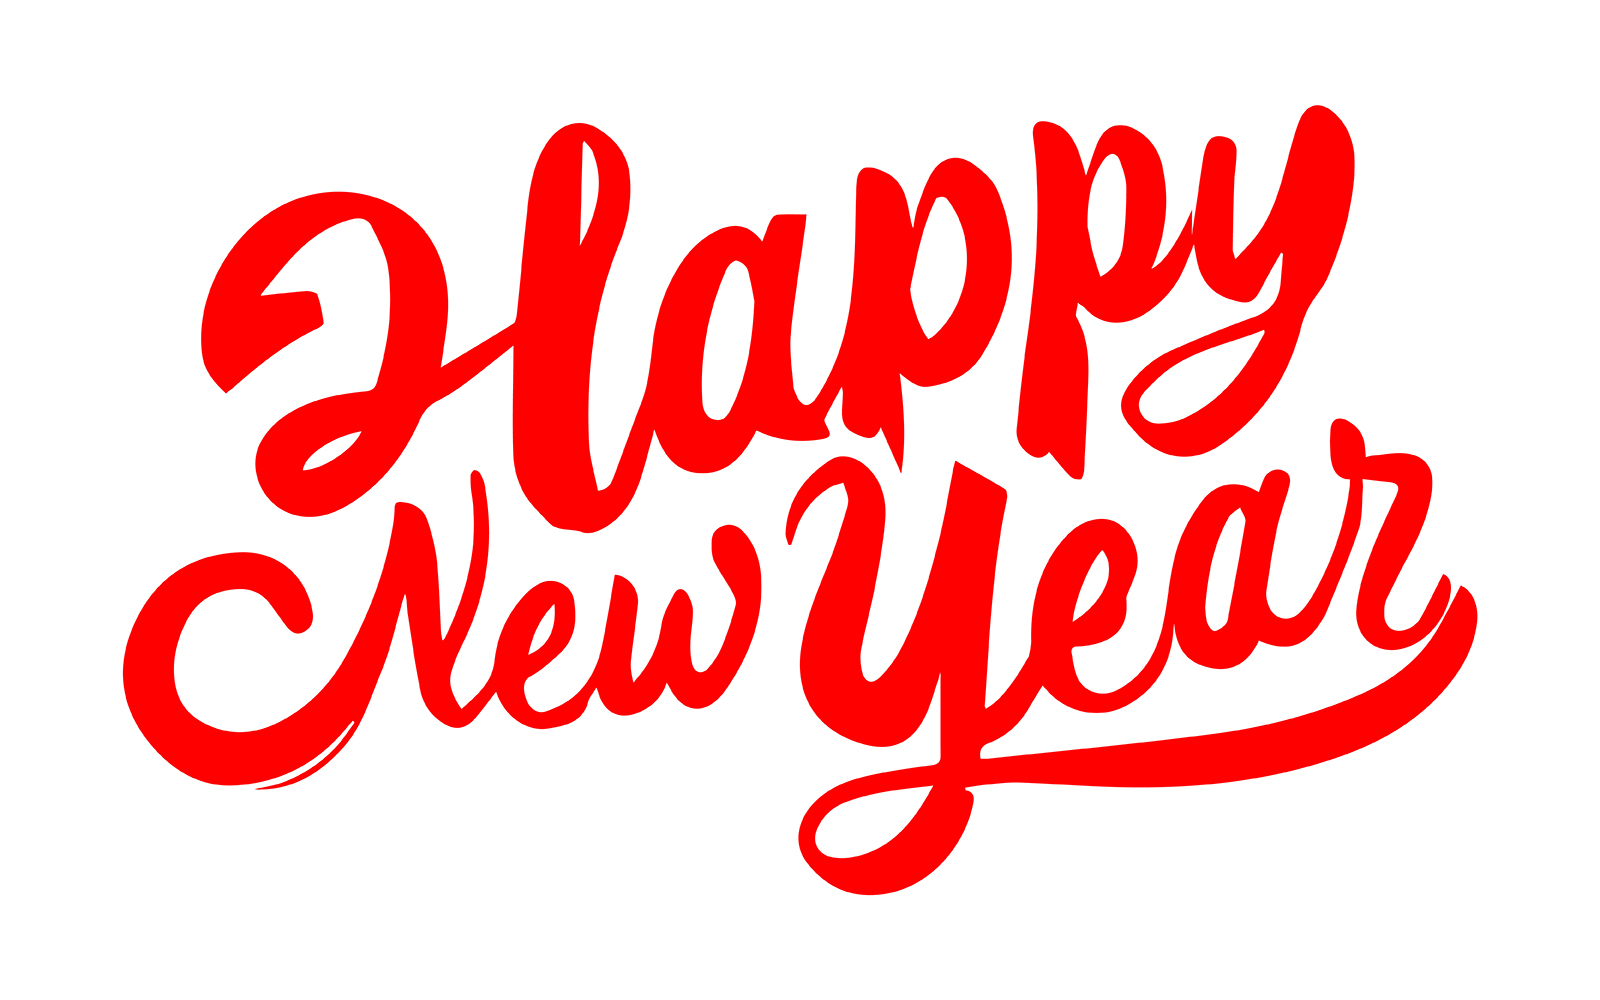 Happy New Year Lettering Vector for greeting card design template with typography